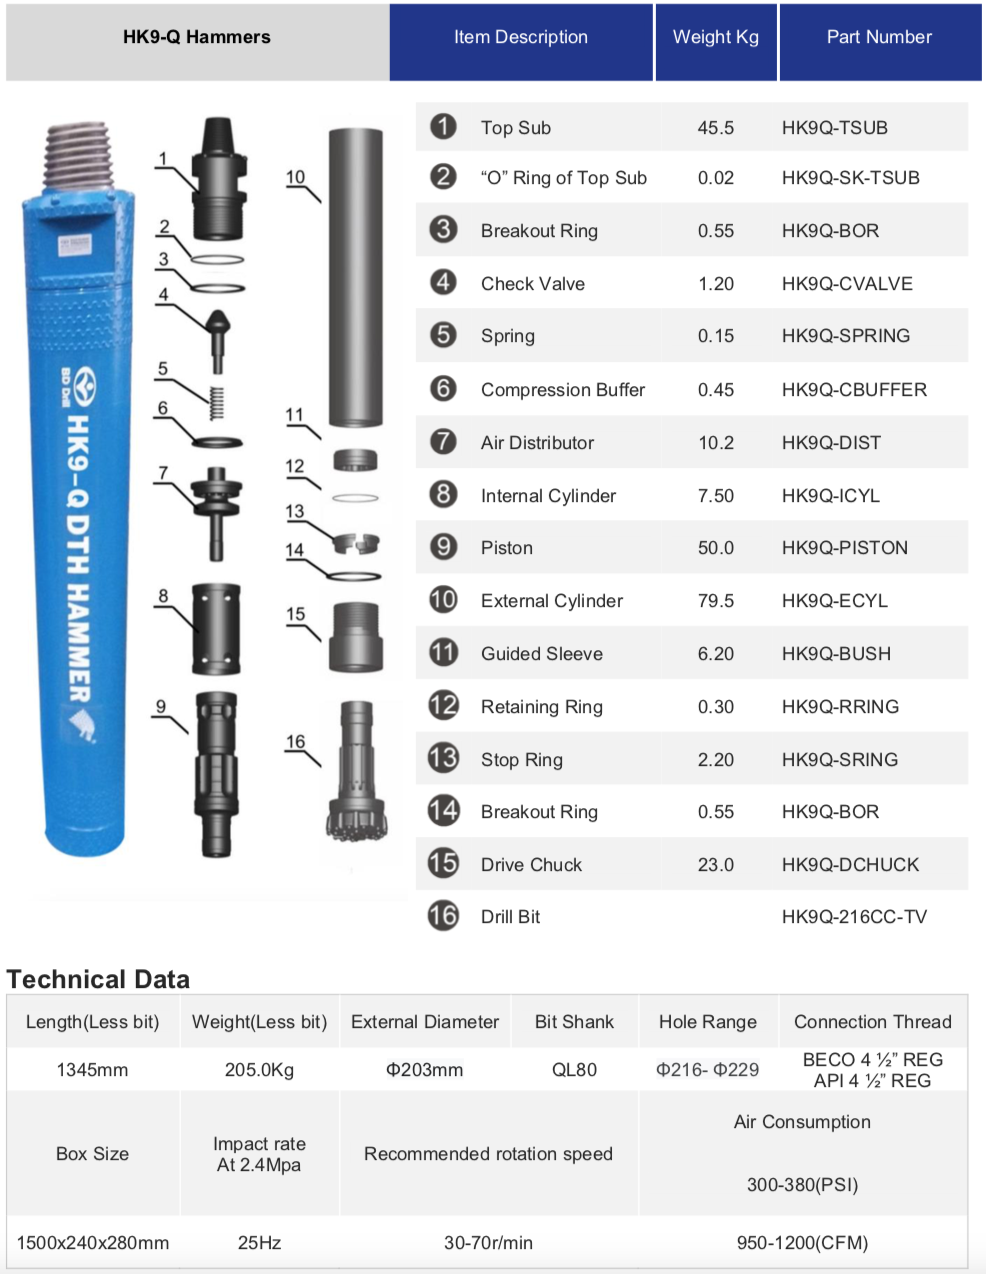 Black Diamond Drilling HK9-Q DTH Down teh Hole Hammer schematic parts list and technical data